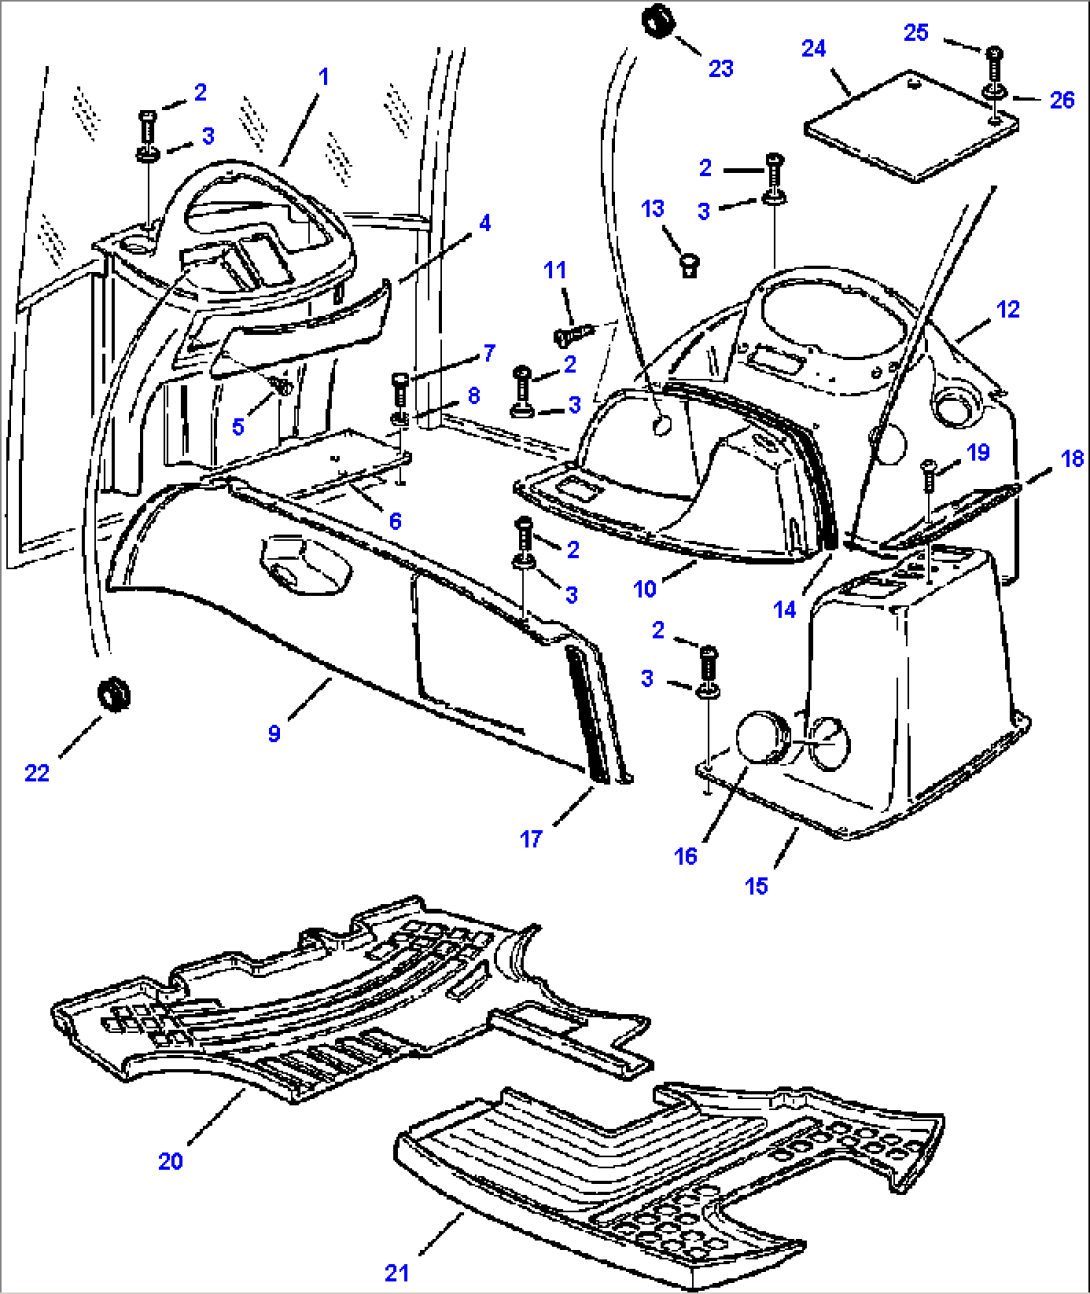 FIG. K5100-01A0 CAB - DASHBOARDS, COVERS AND FLOOR MAT